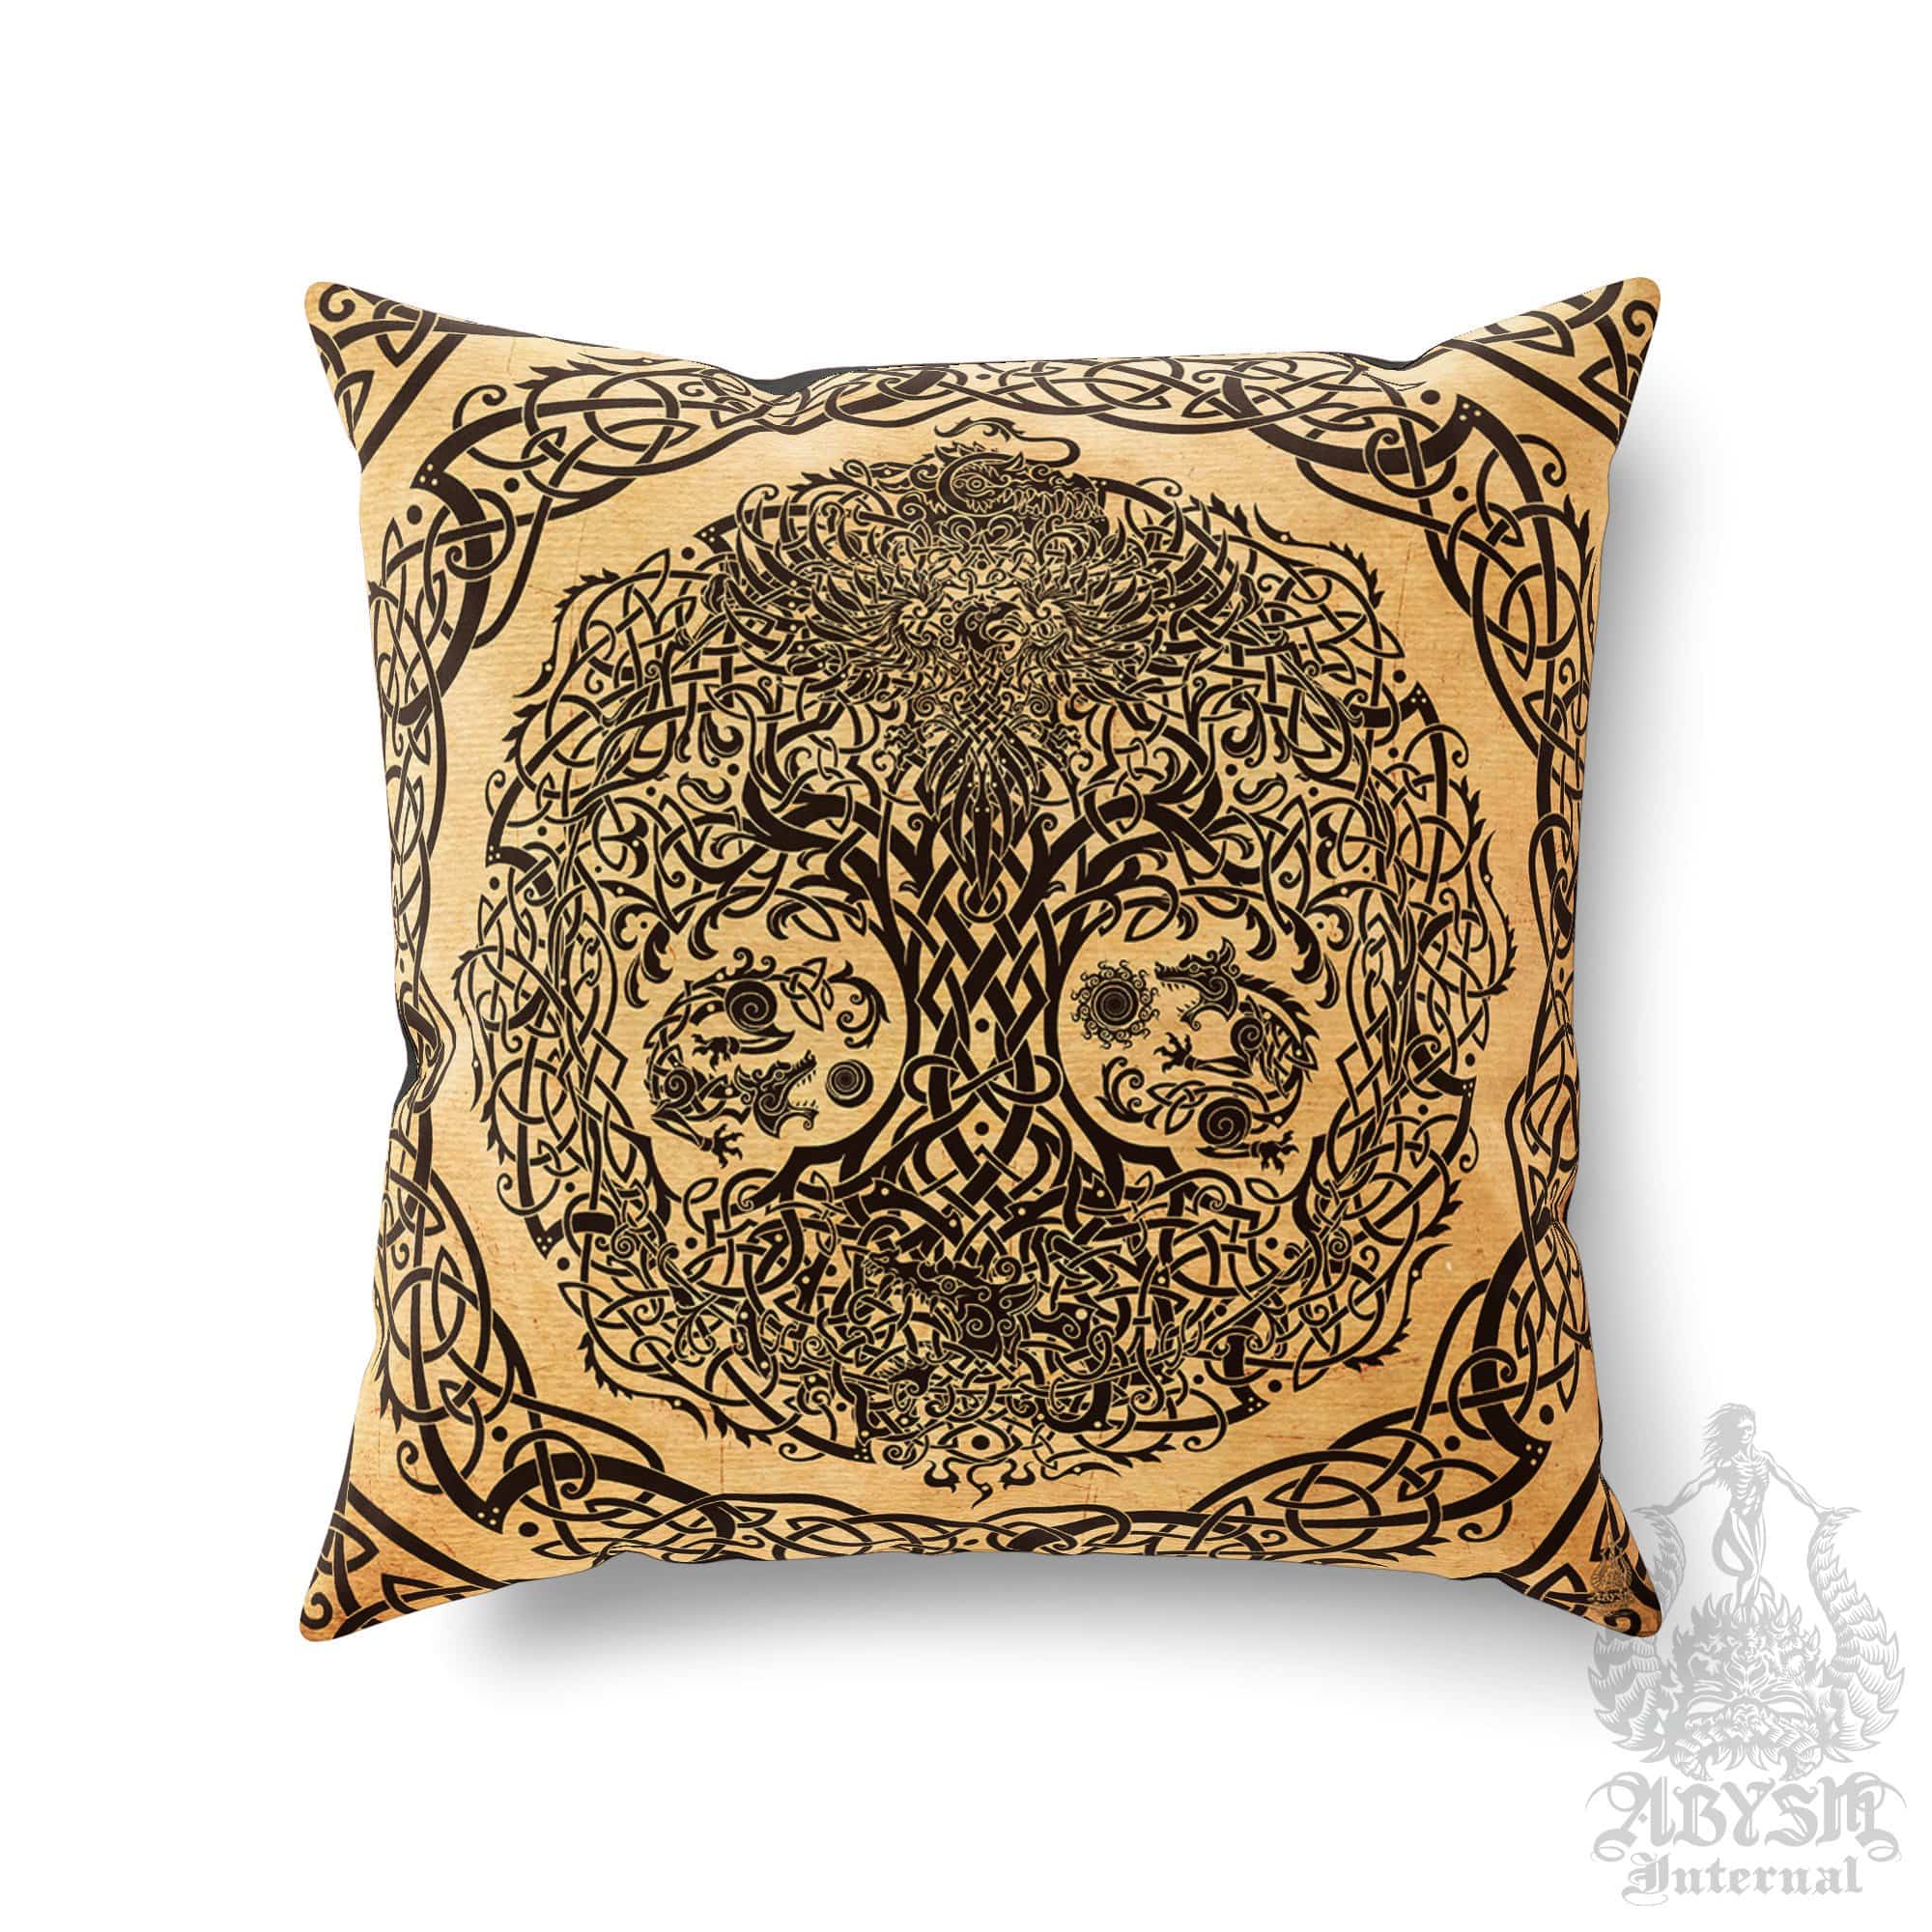 Viking Throw Pillow, Decorative Accent Cushion, Yggdrasil, Norse Decor, Nordic Art, Alternative Home - Tree of Life, Paper - Abysm Internal